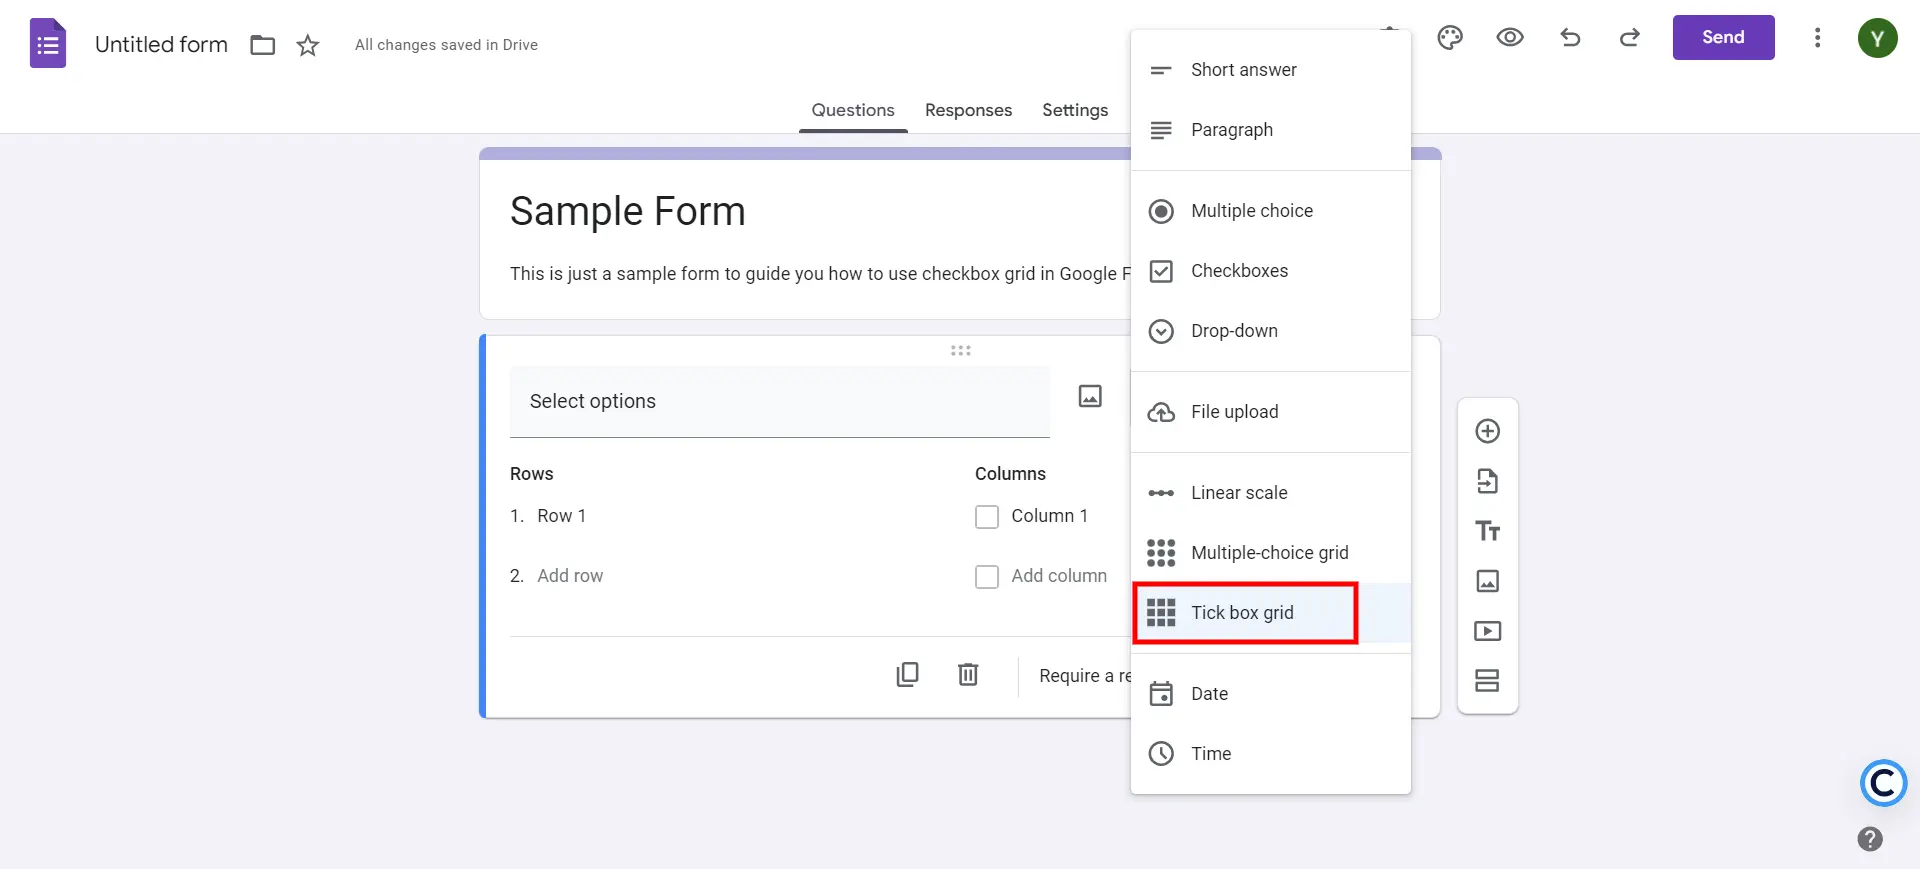 Checkbox Grid in Google Forms - Select tickbox grid